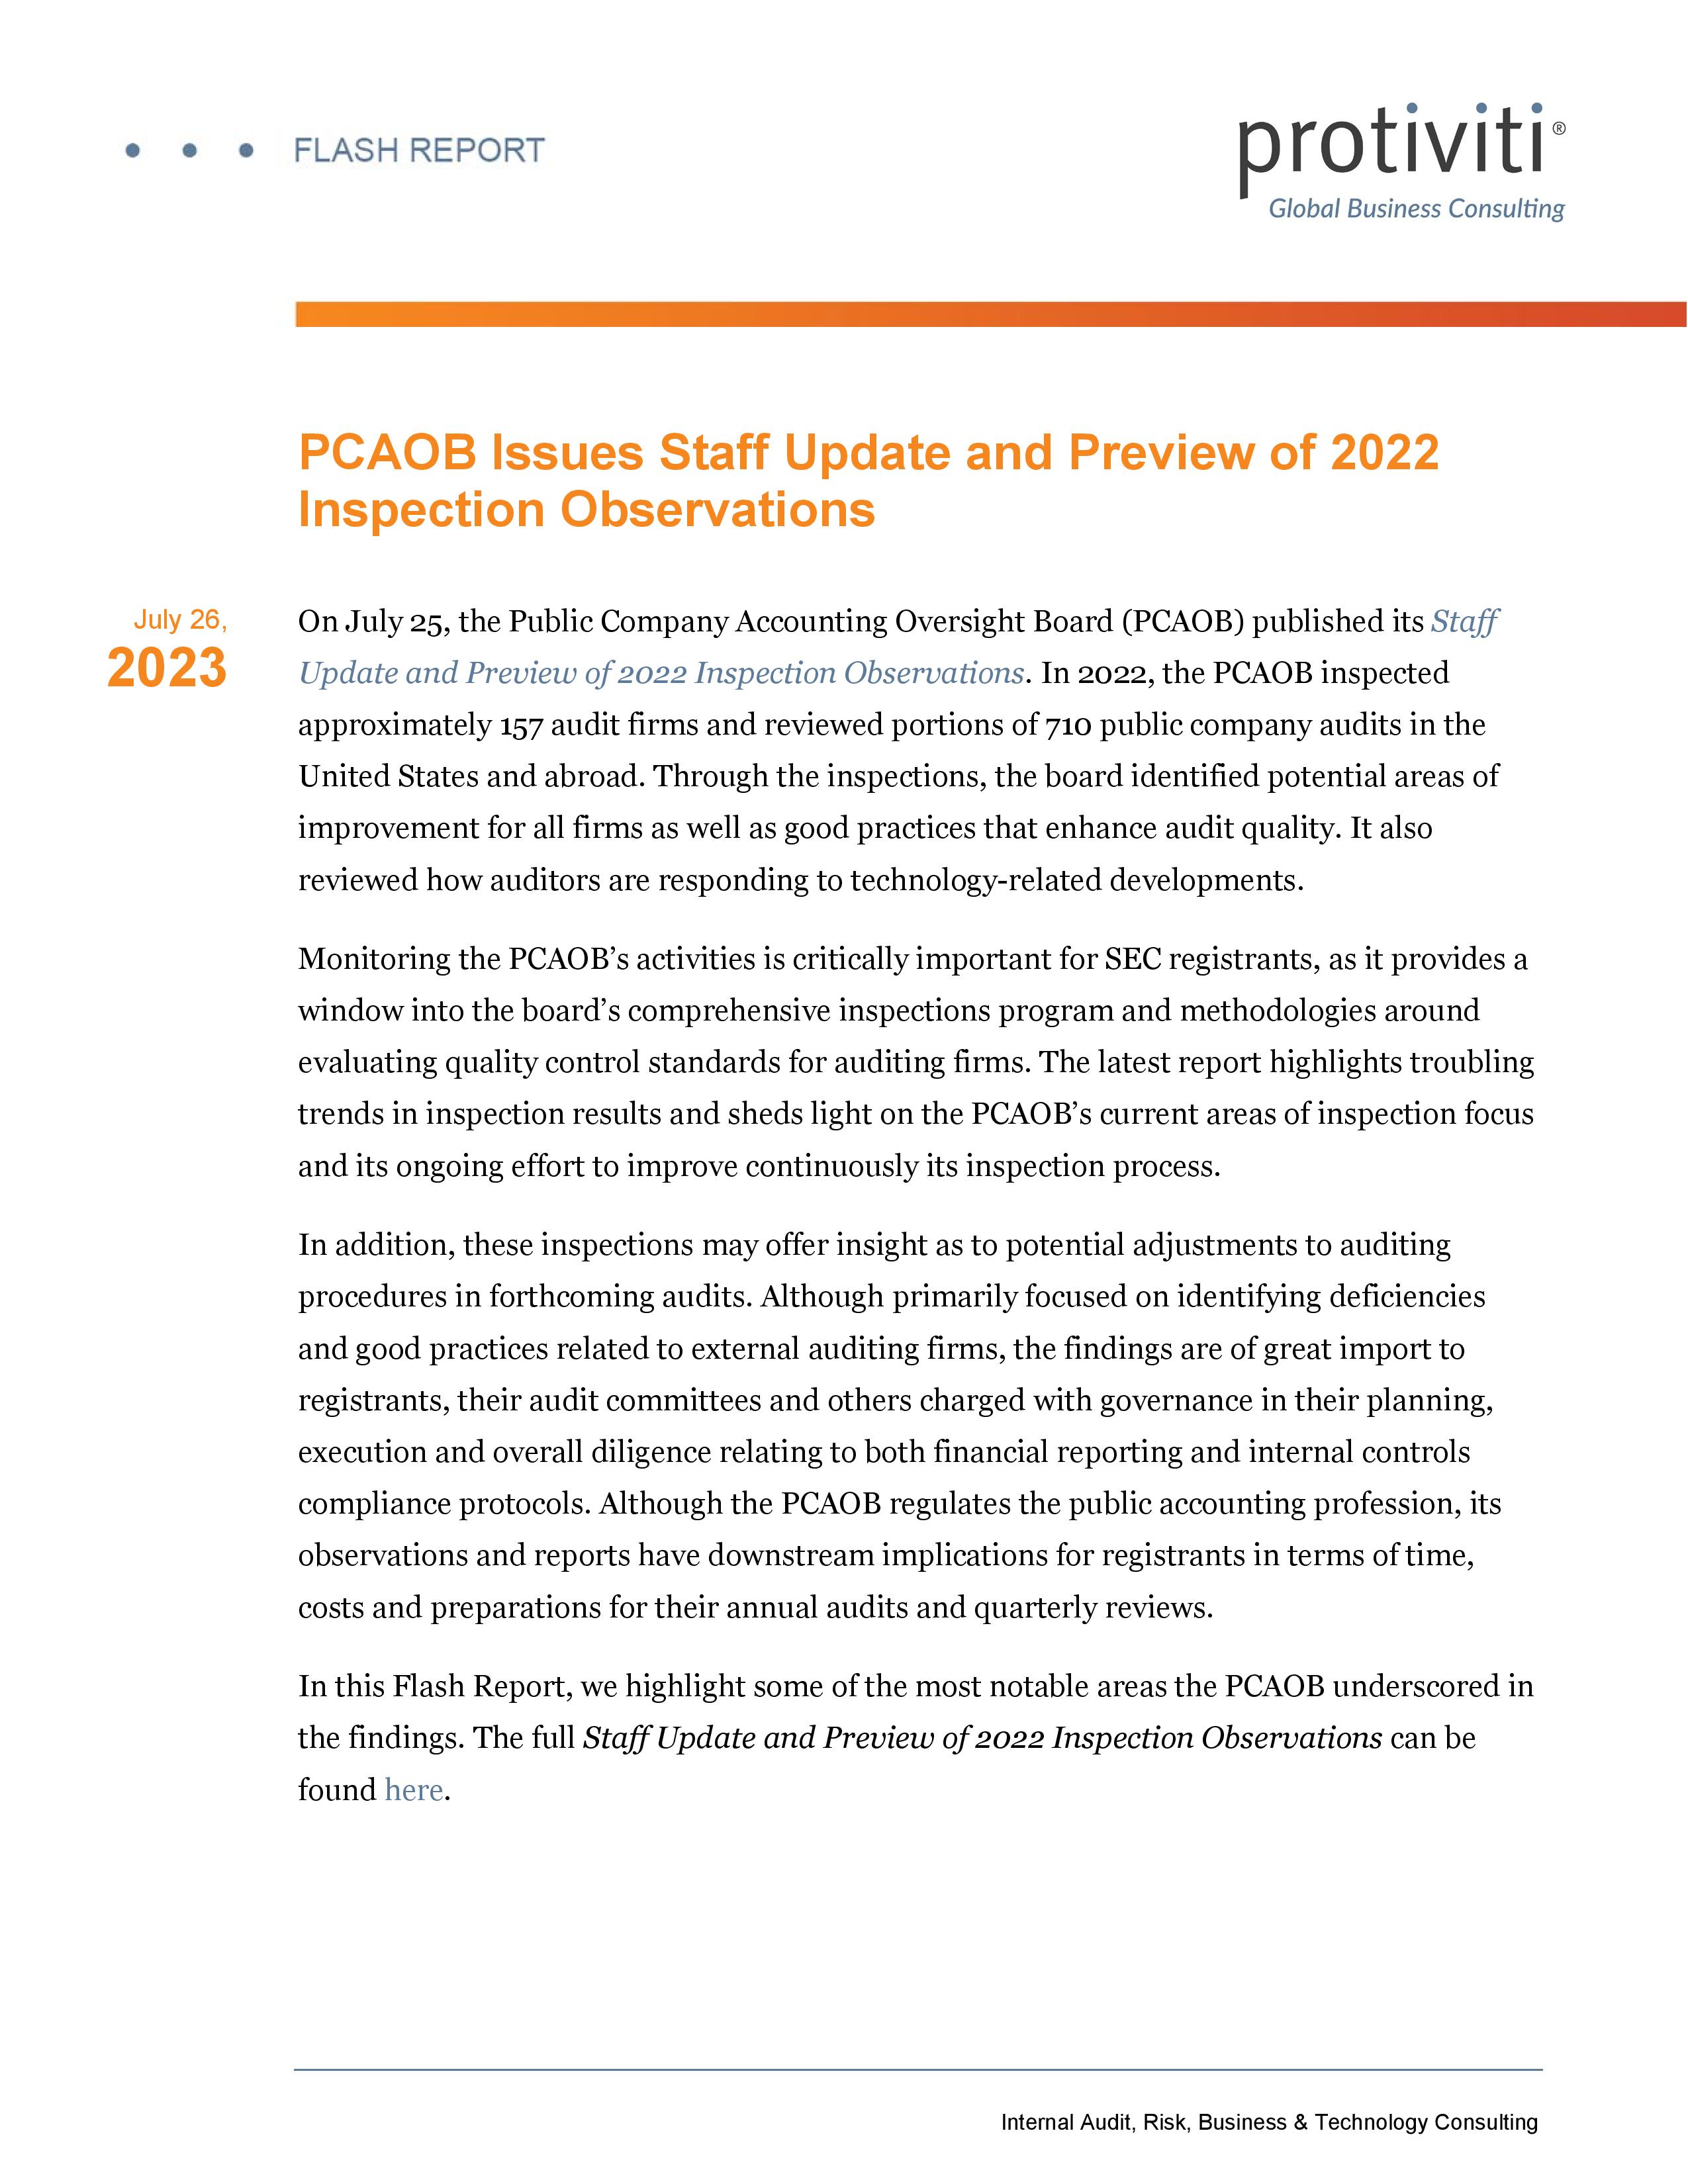 screenshot of the first page of PCAOB Issues Staff Update and Preview of 2022 Inspection Observations